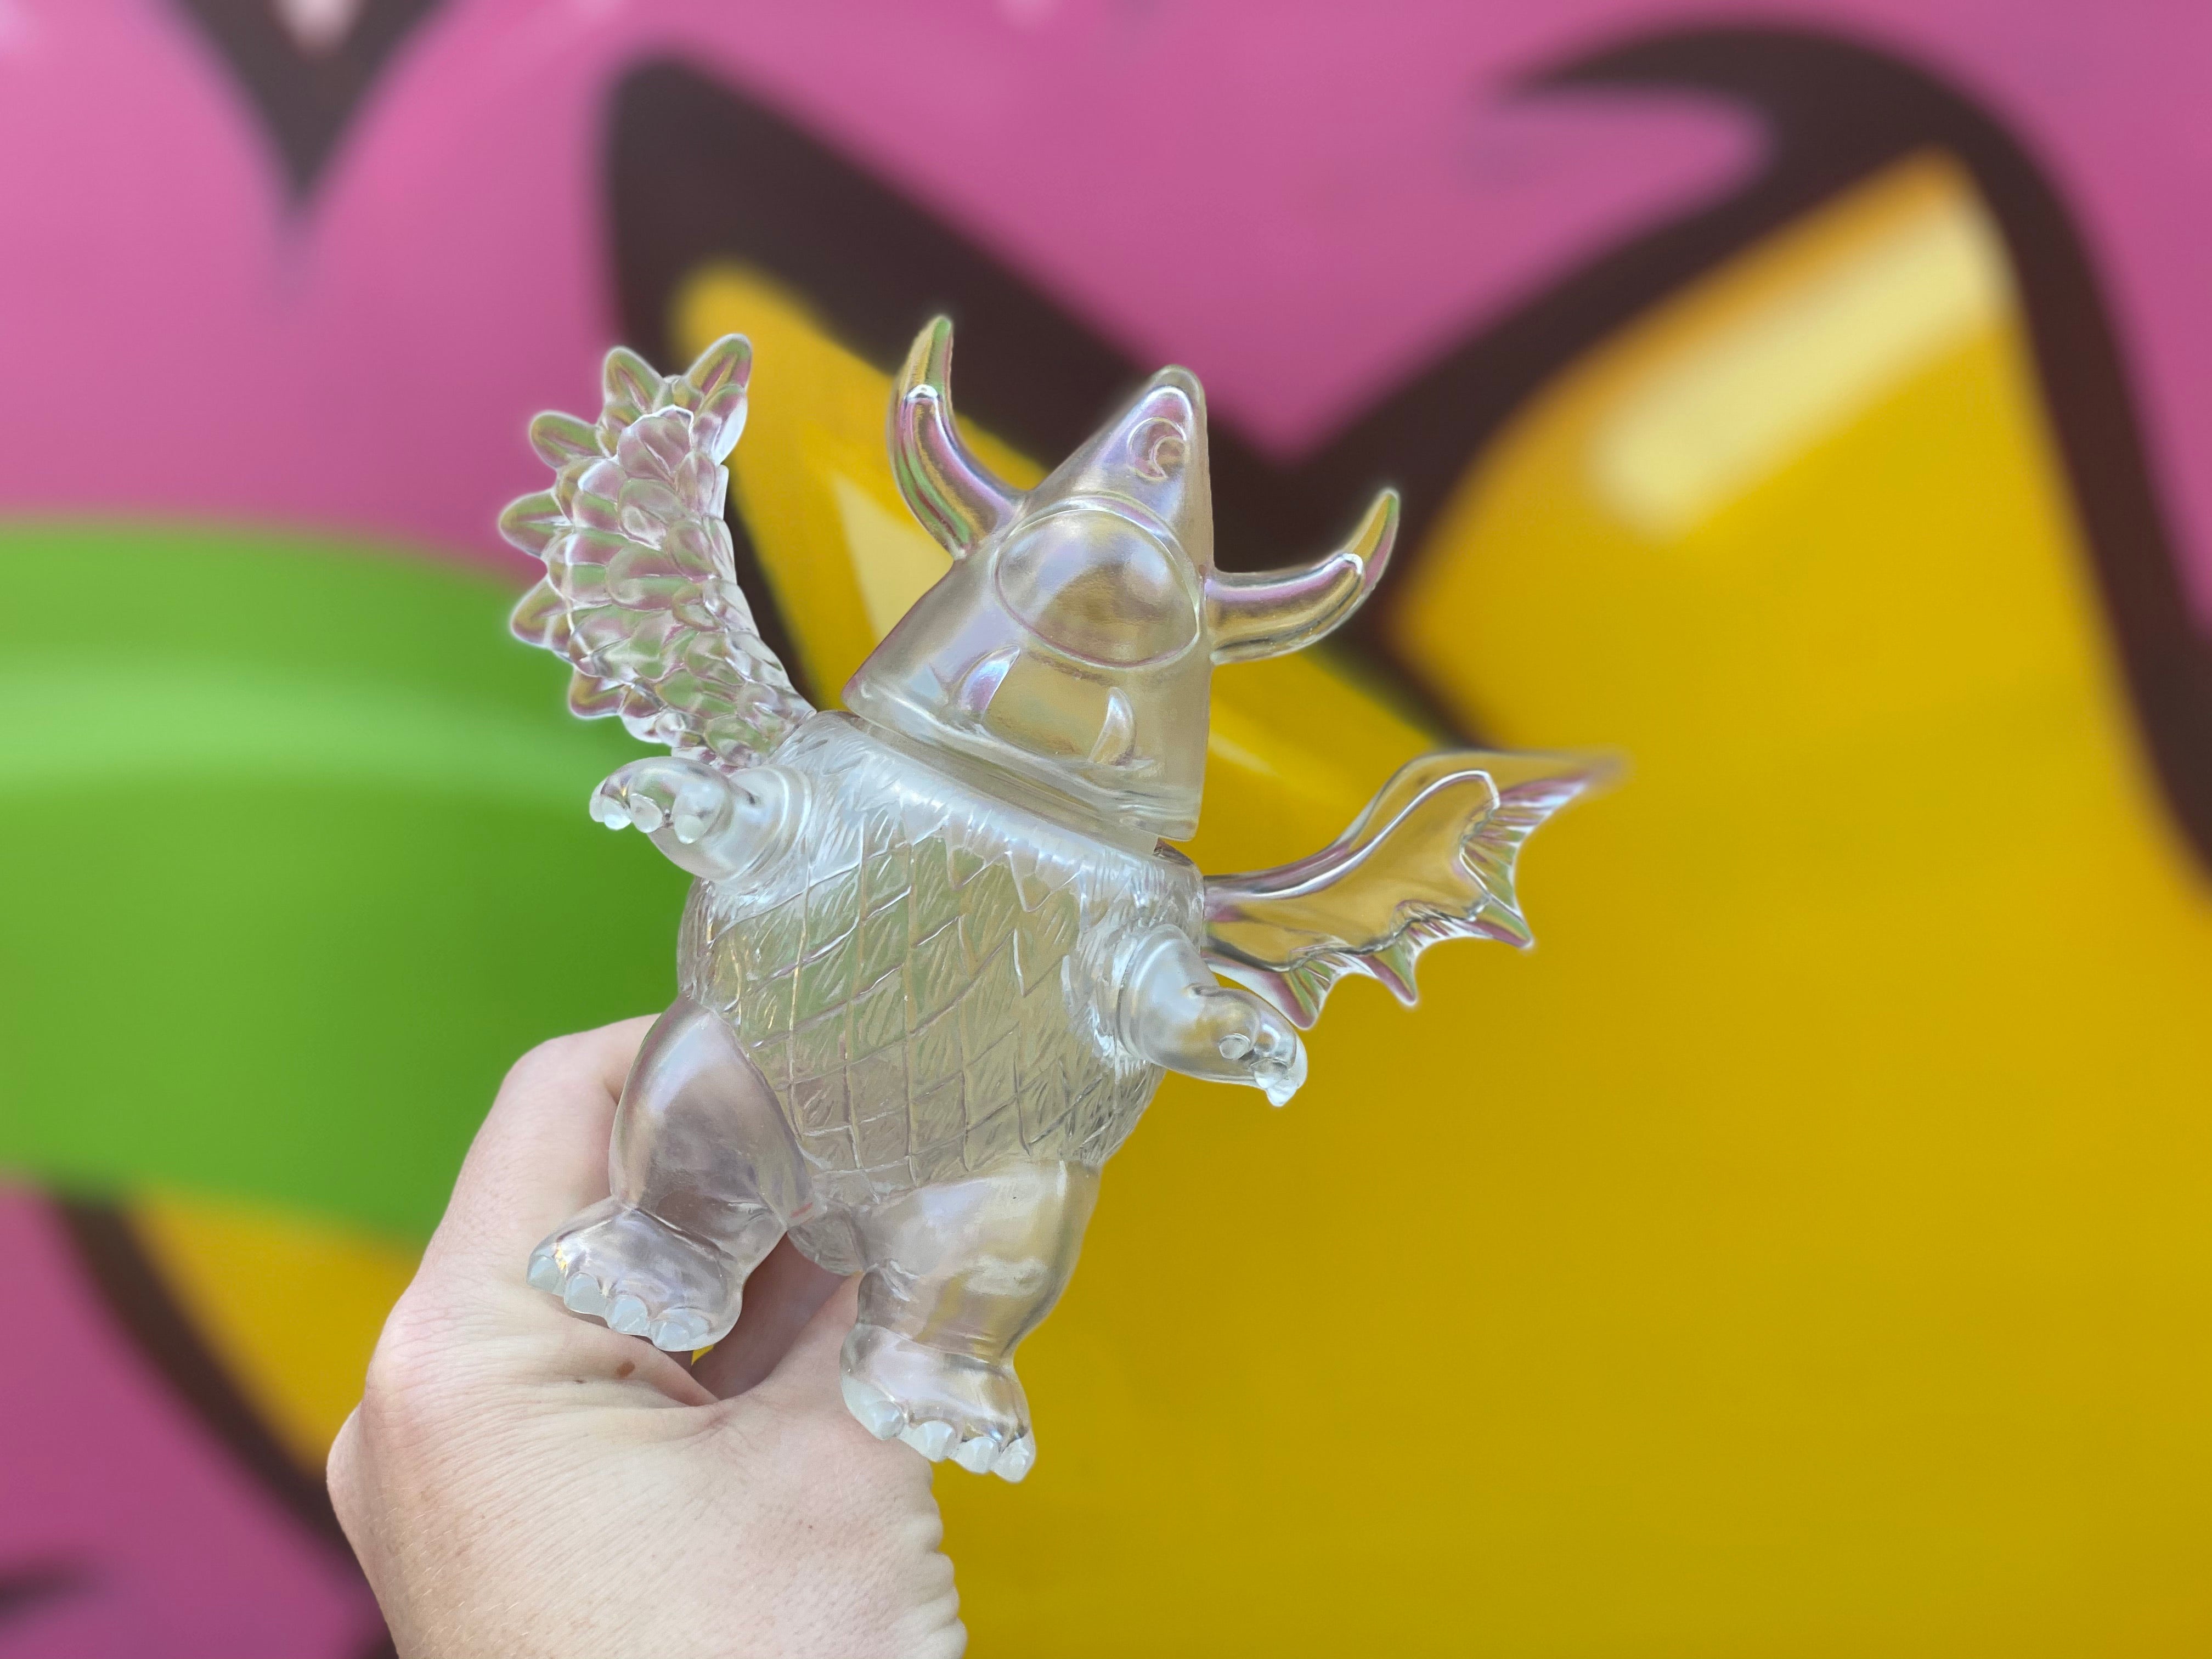 Sofubi toy Hoshirudon Clear by Sky Toy, a hand holding a clear plastic toy with wings, 14cm spinning head.